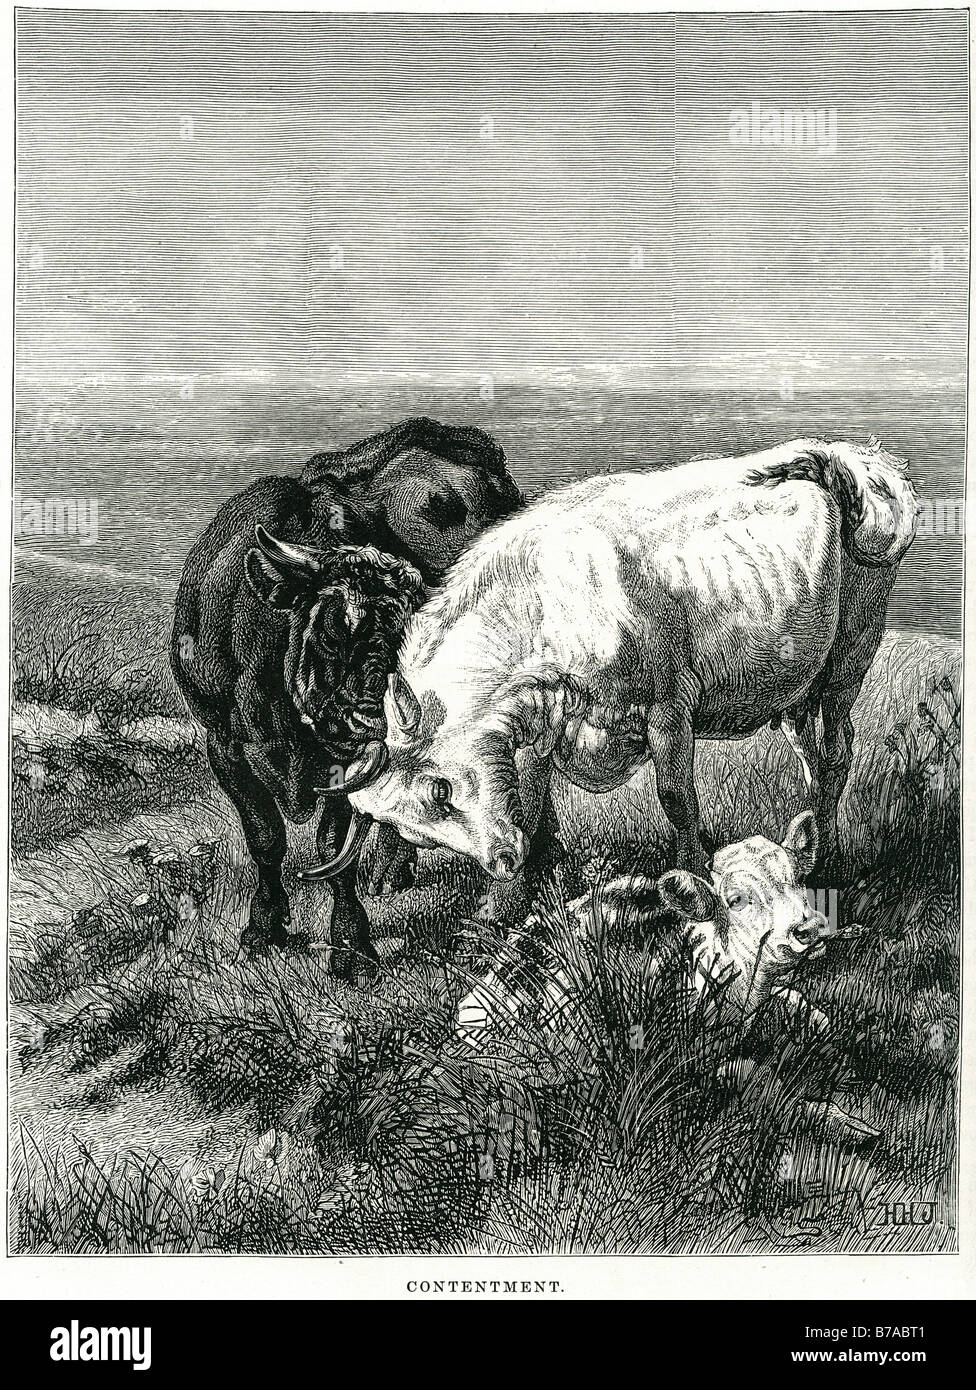 contentment bull cow cattle calf field pasture happy family horn H W B henry william banks Davis R A royal academy 1877 Stock Photo